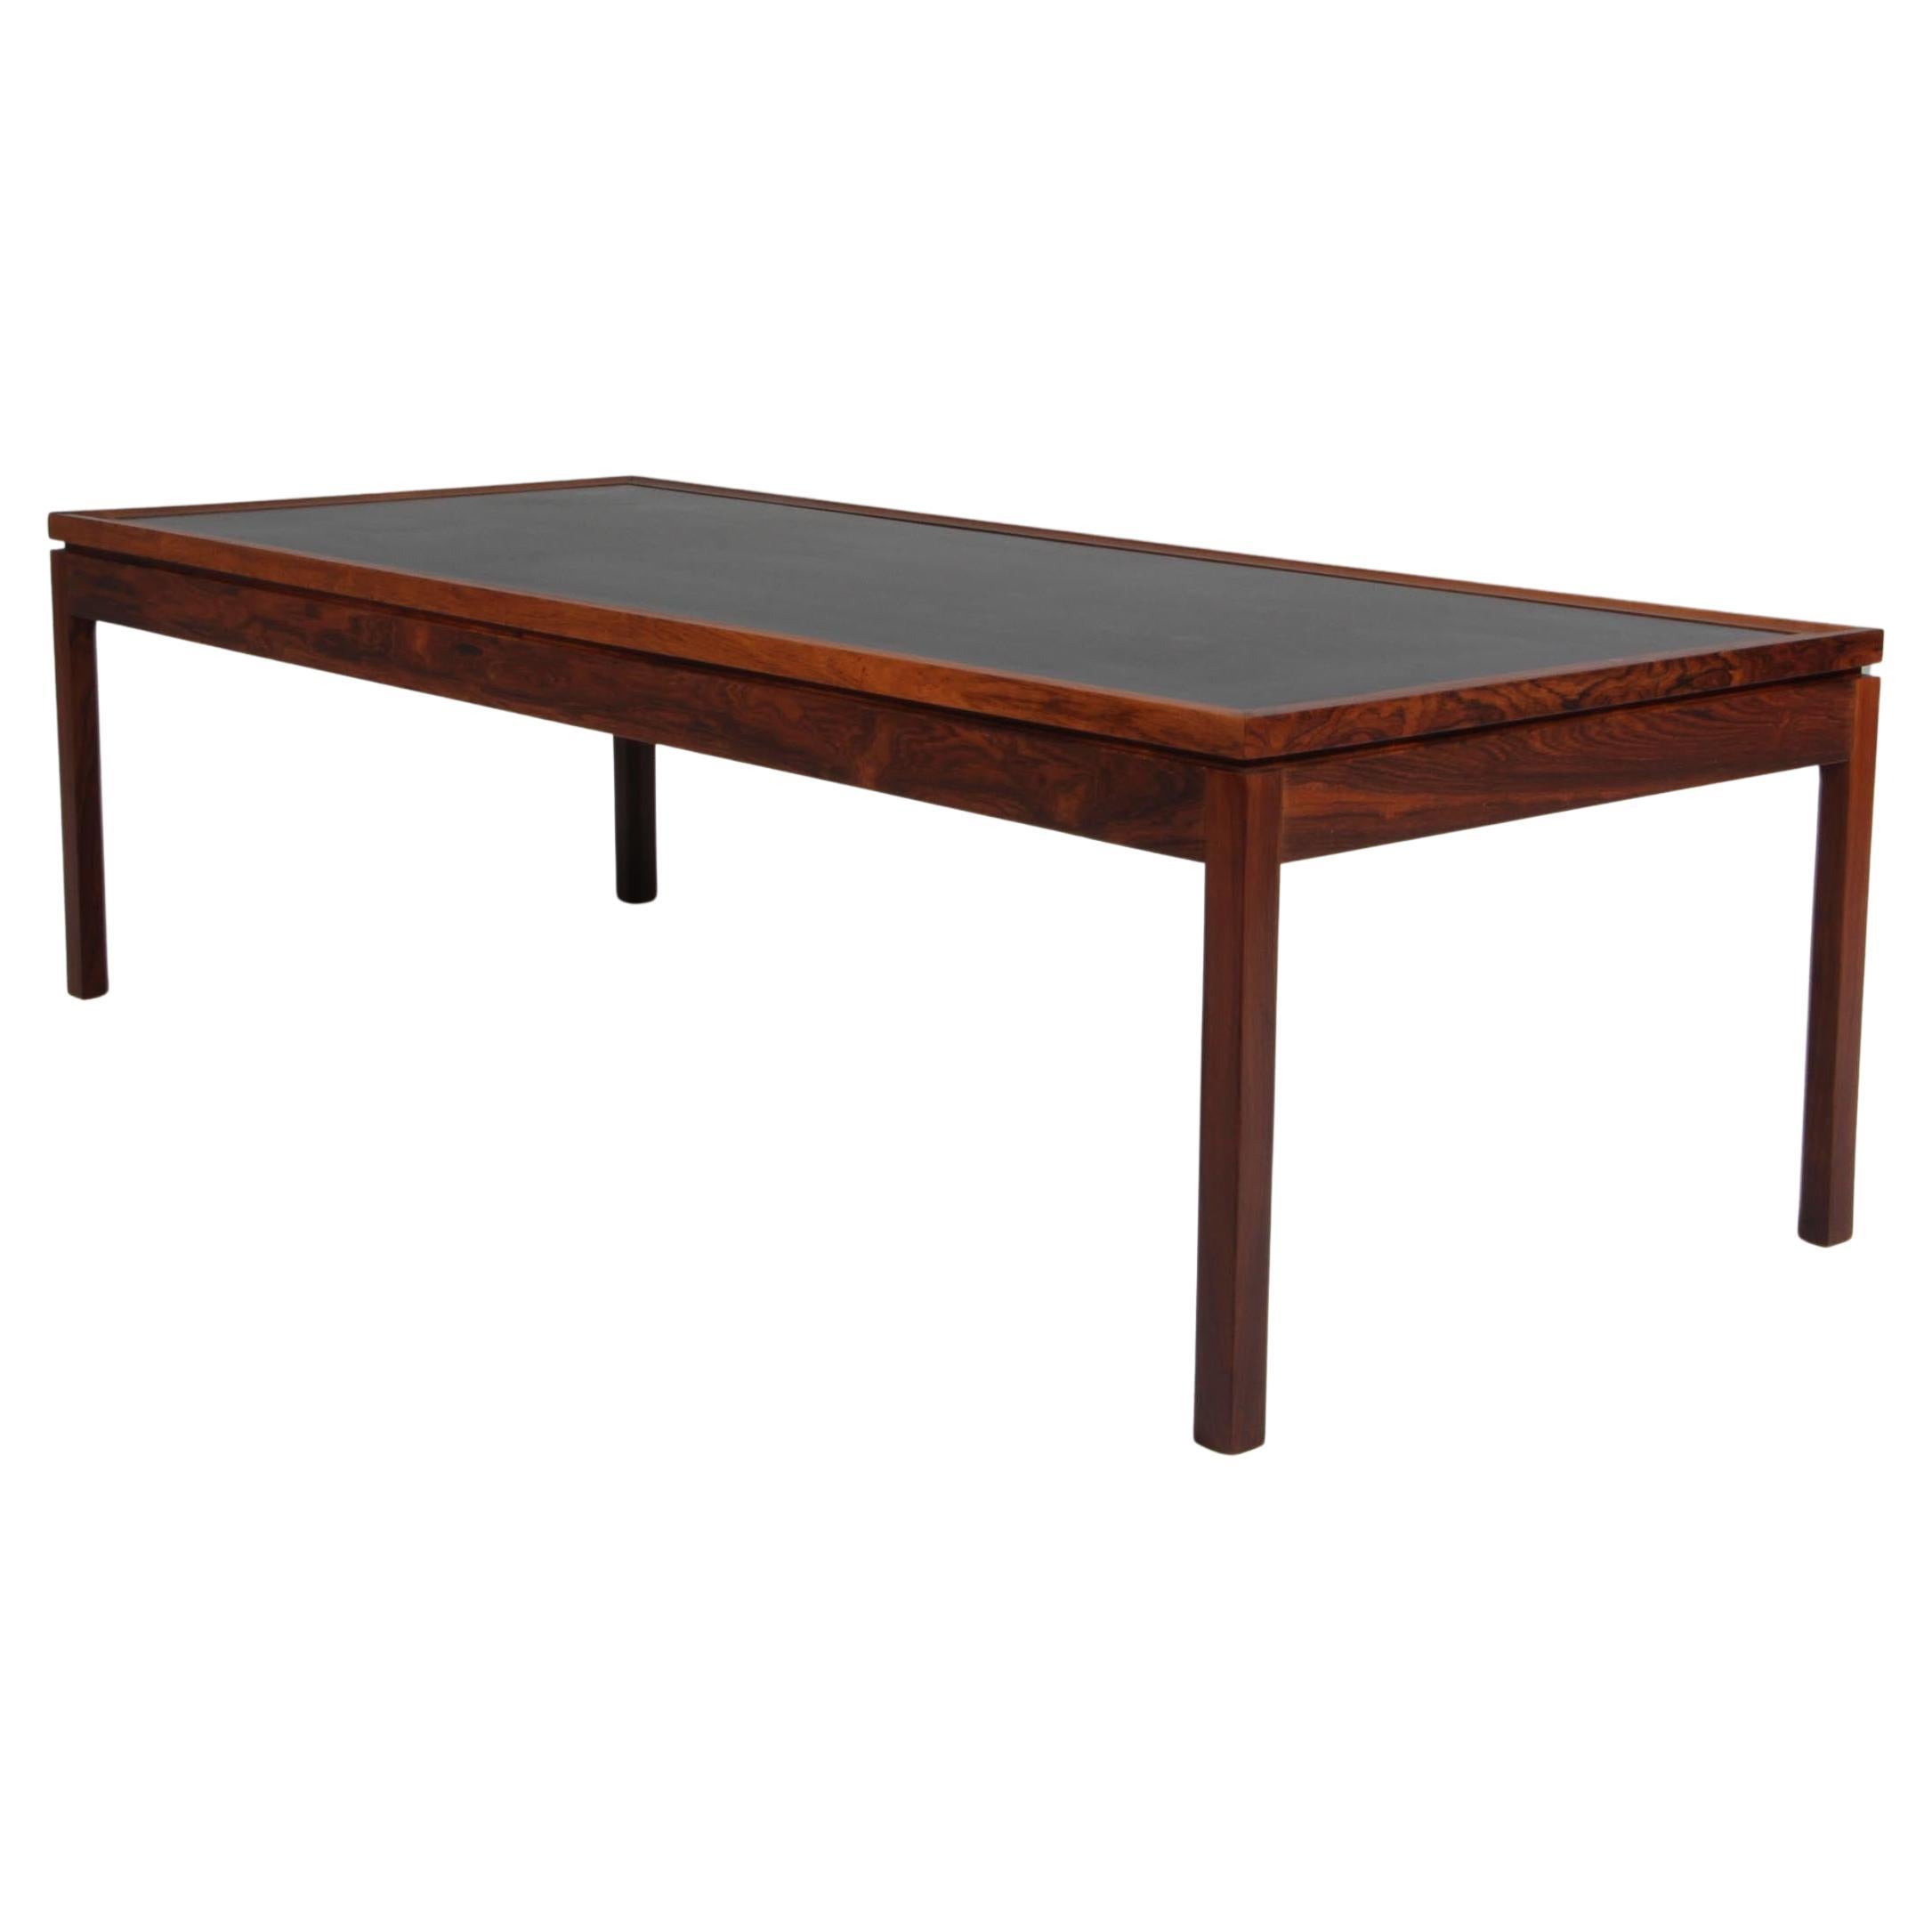 Ejvind A. Johansson coffee table rosewood and black formica, 1960s Denmark For Sale